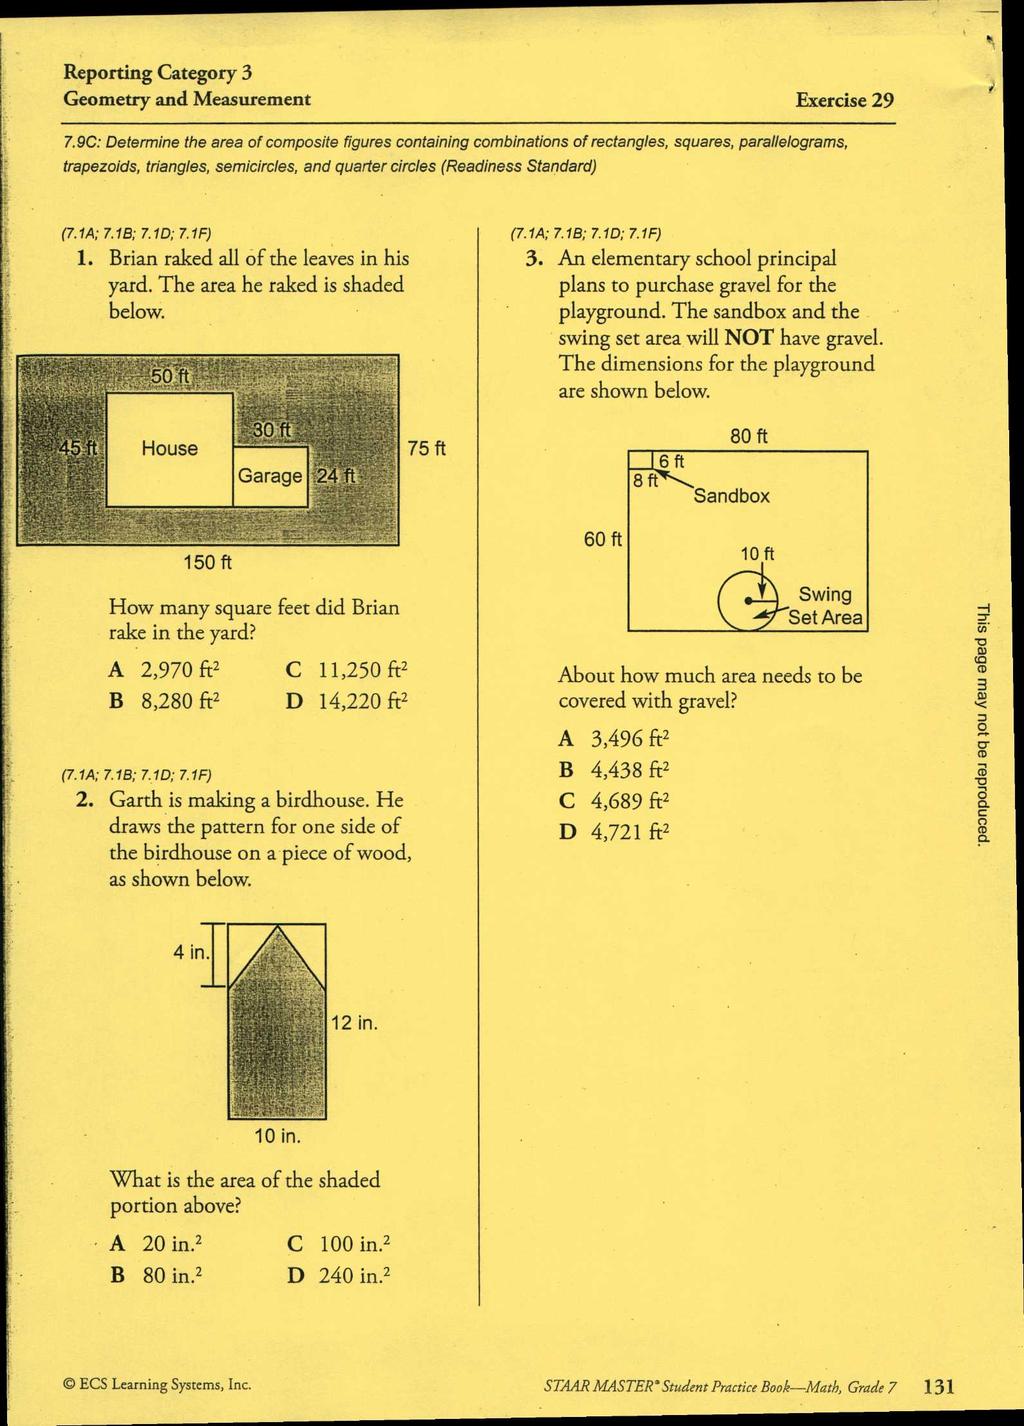 Geometry and Measurement Exercise 29 7.